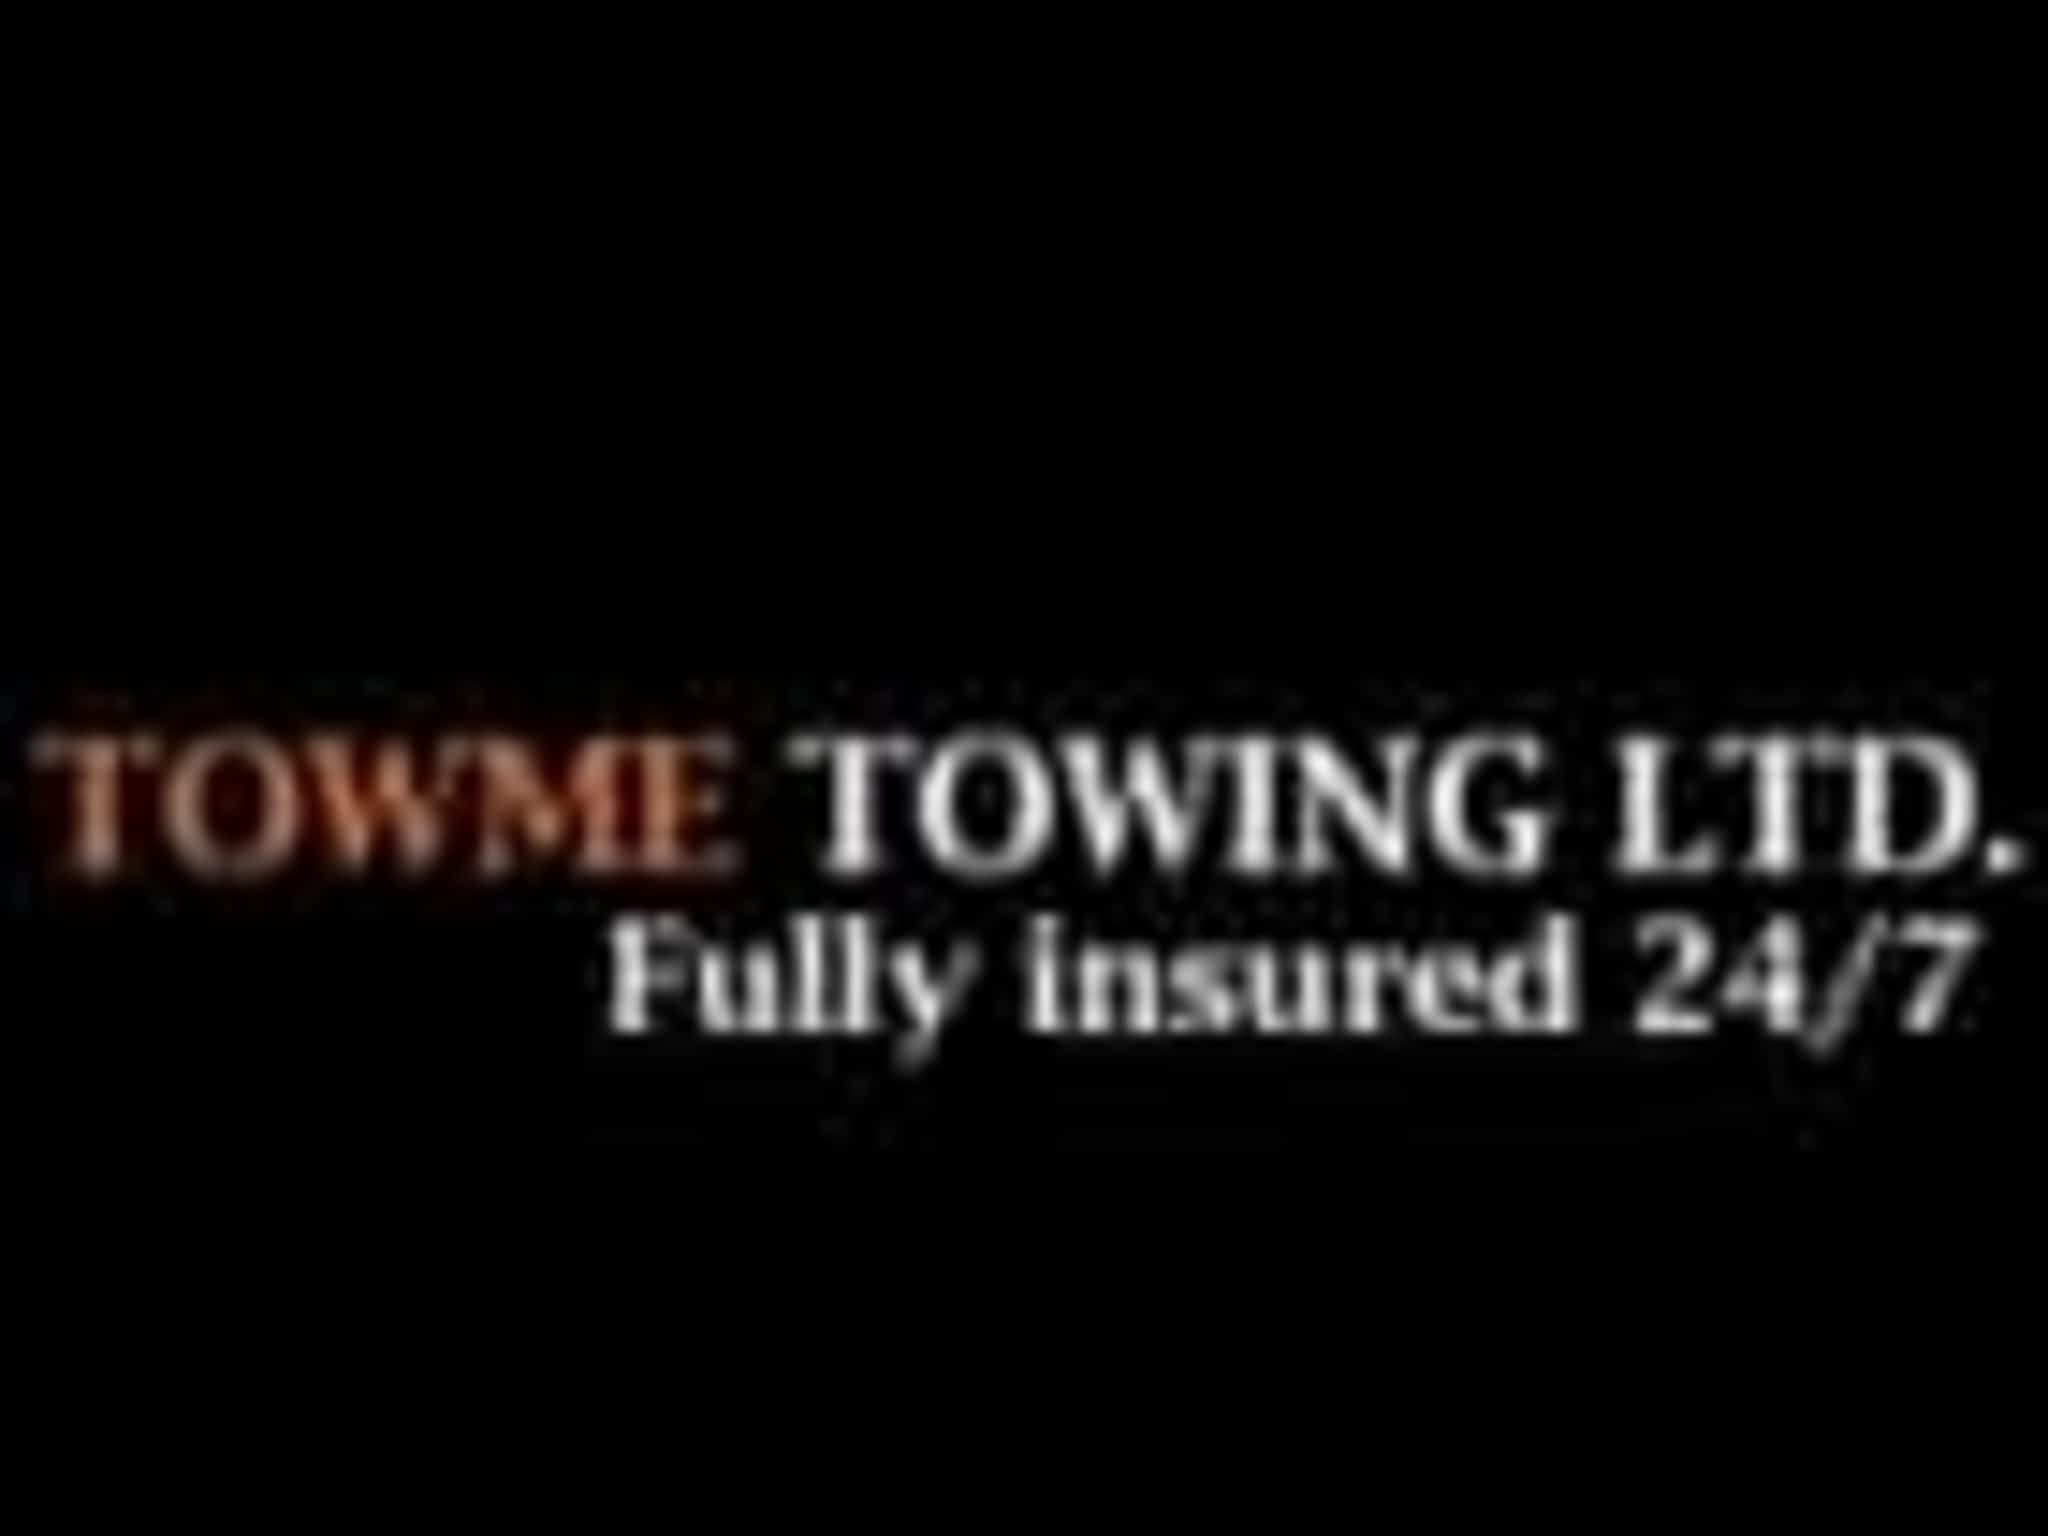 photo Towme Towing Services Ltd